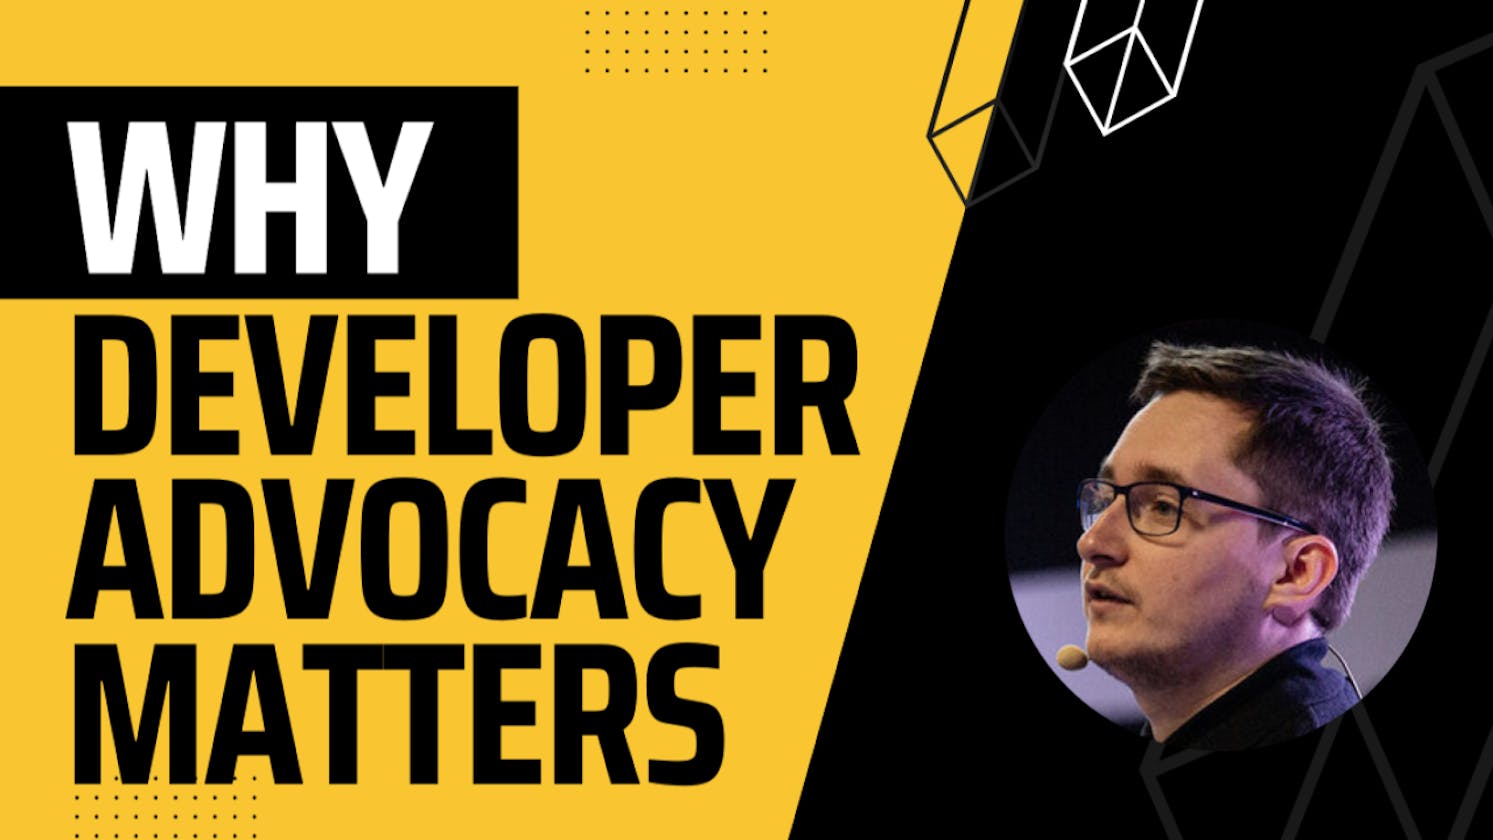 Why Developer Advocacy matters...